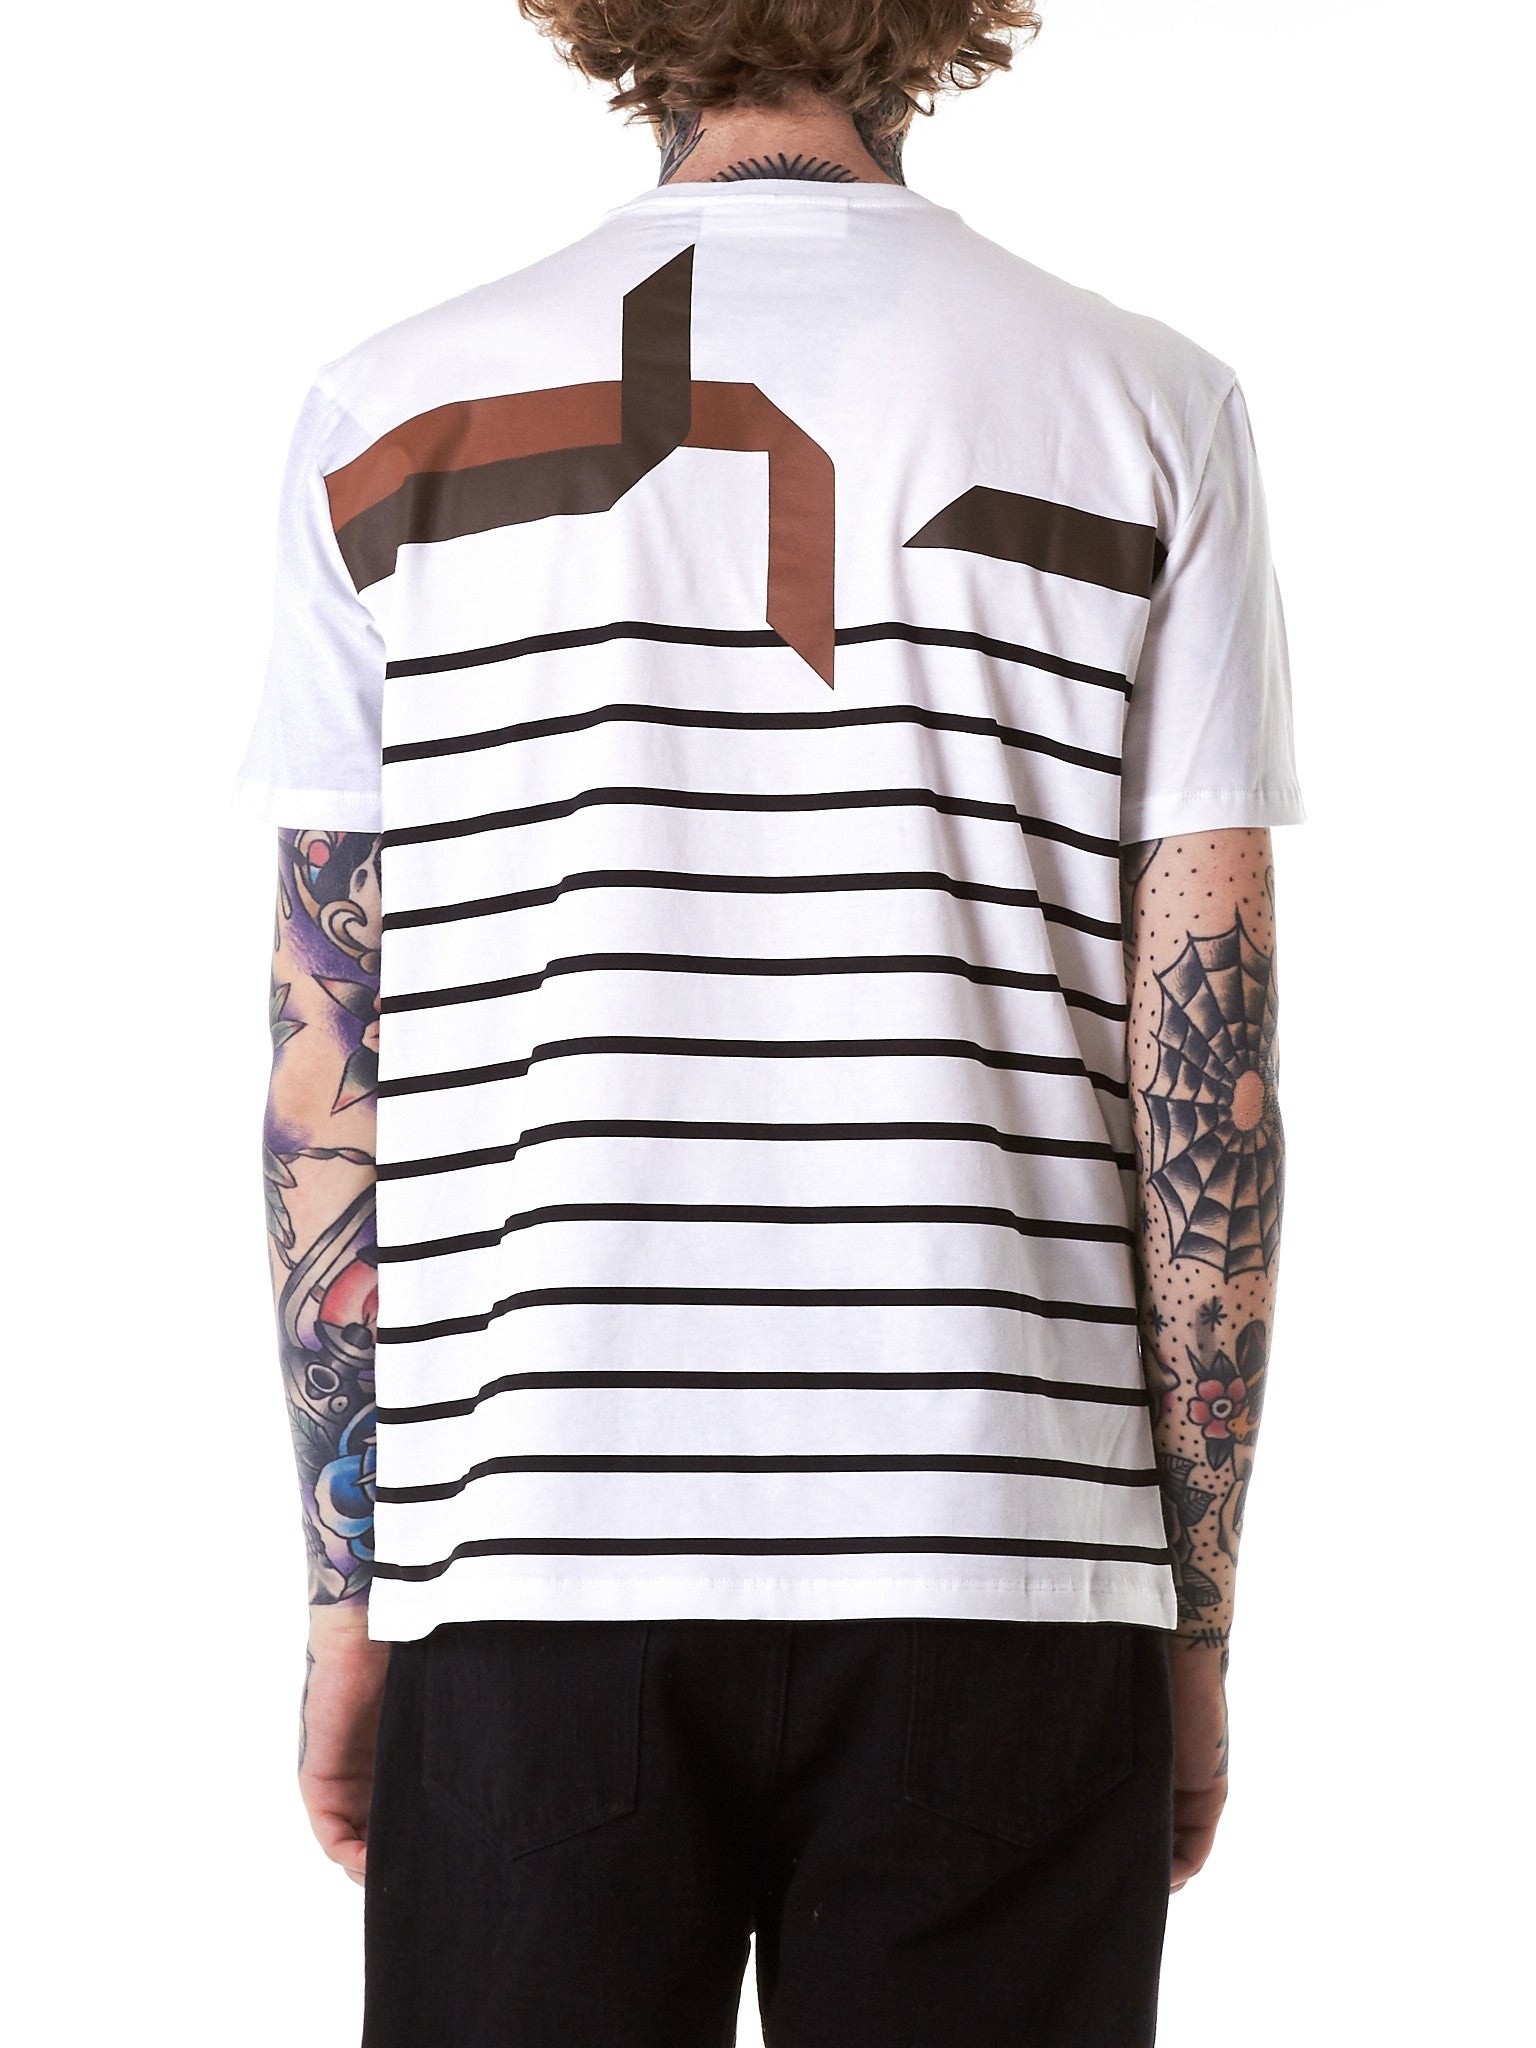 Striped Graphic Tee - 3